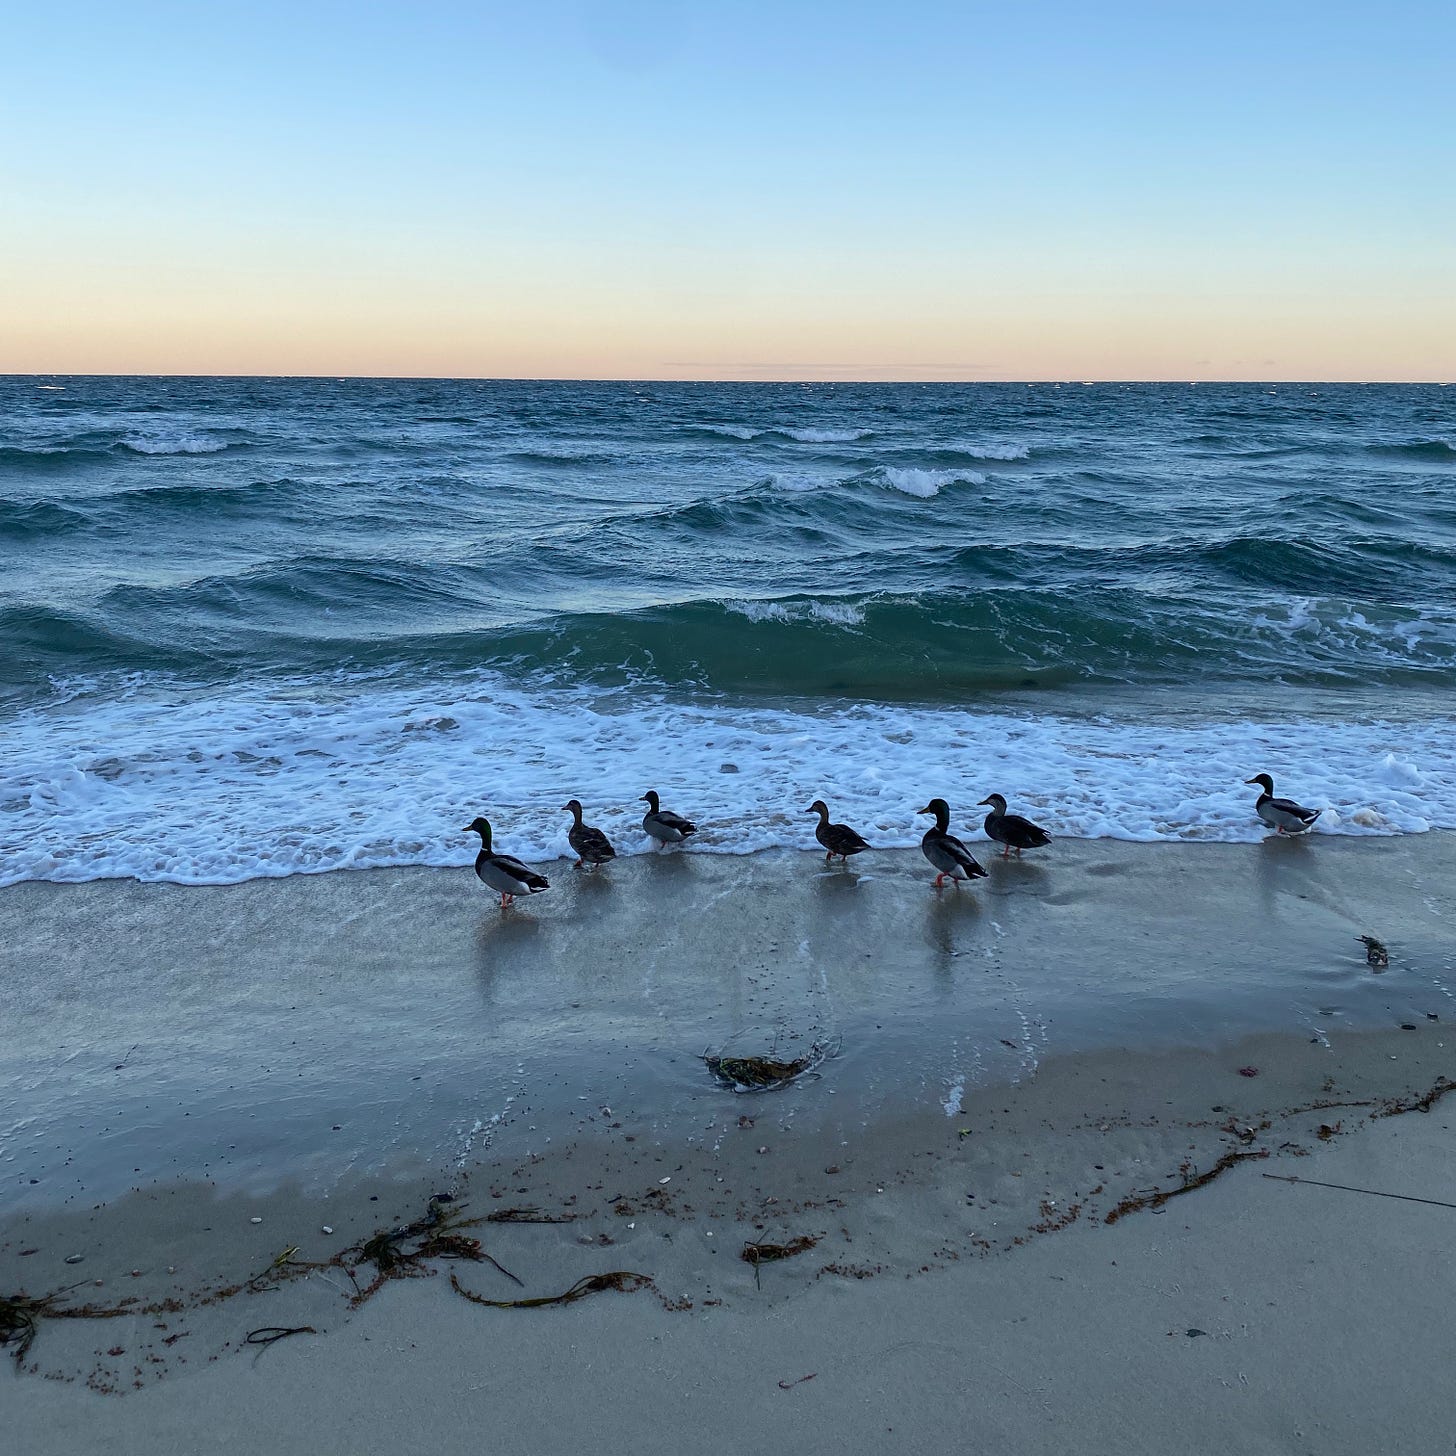 A group of ducks standing on the beach in the breaking surf.